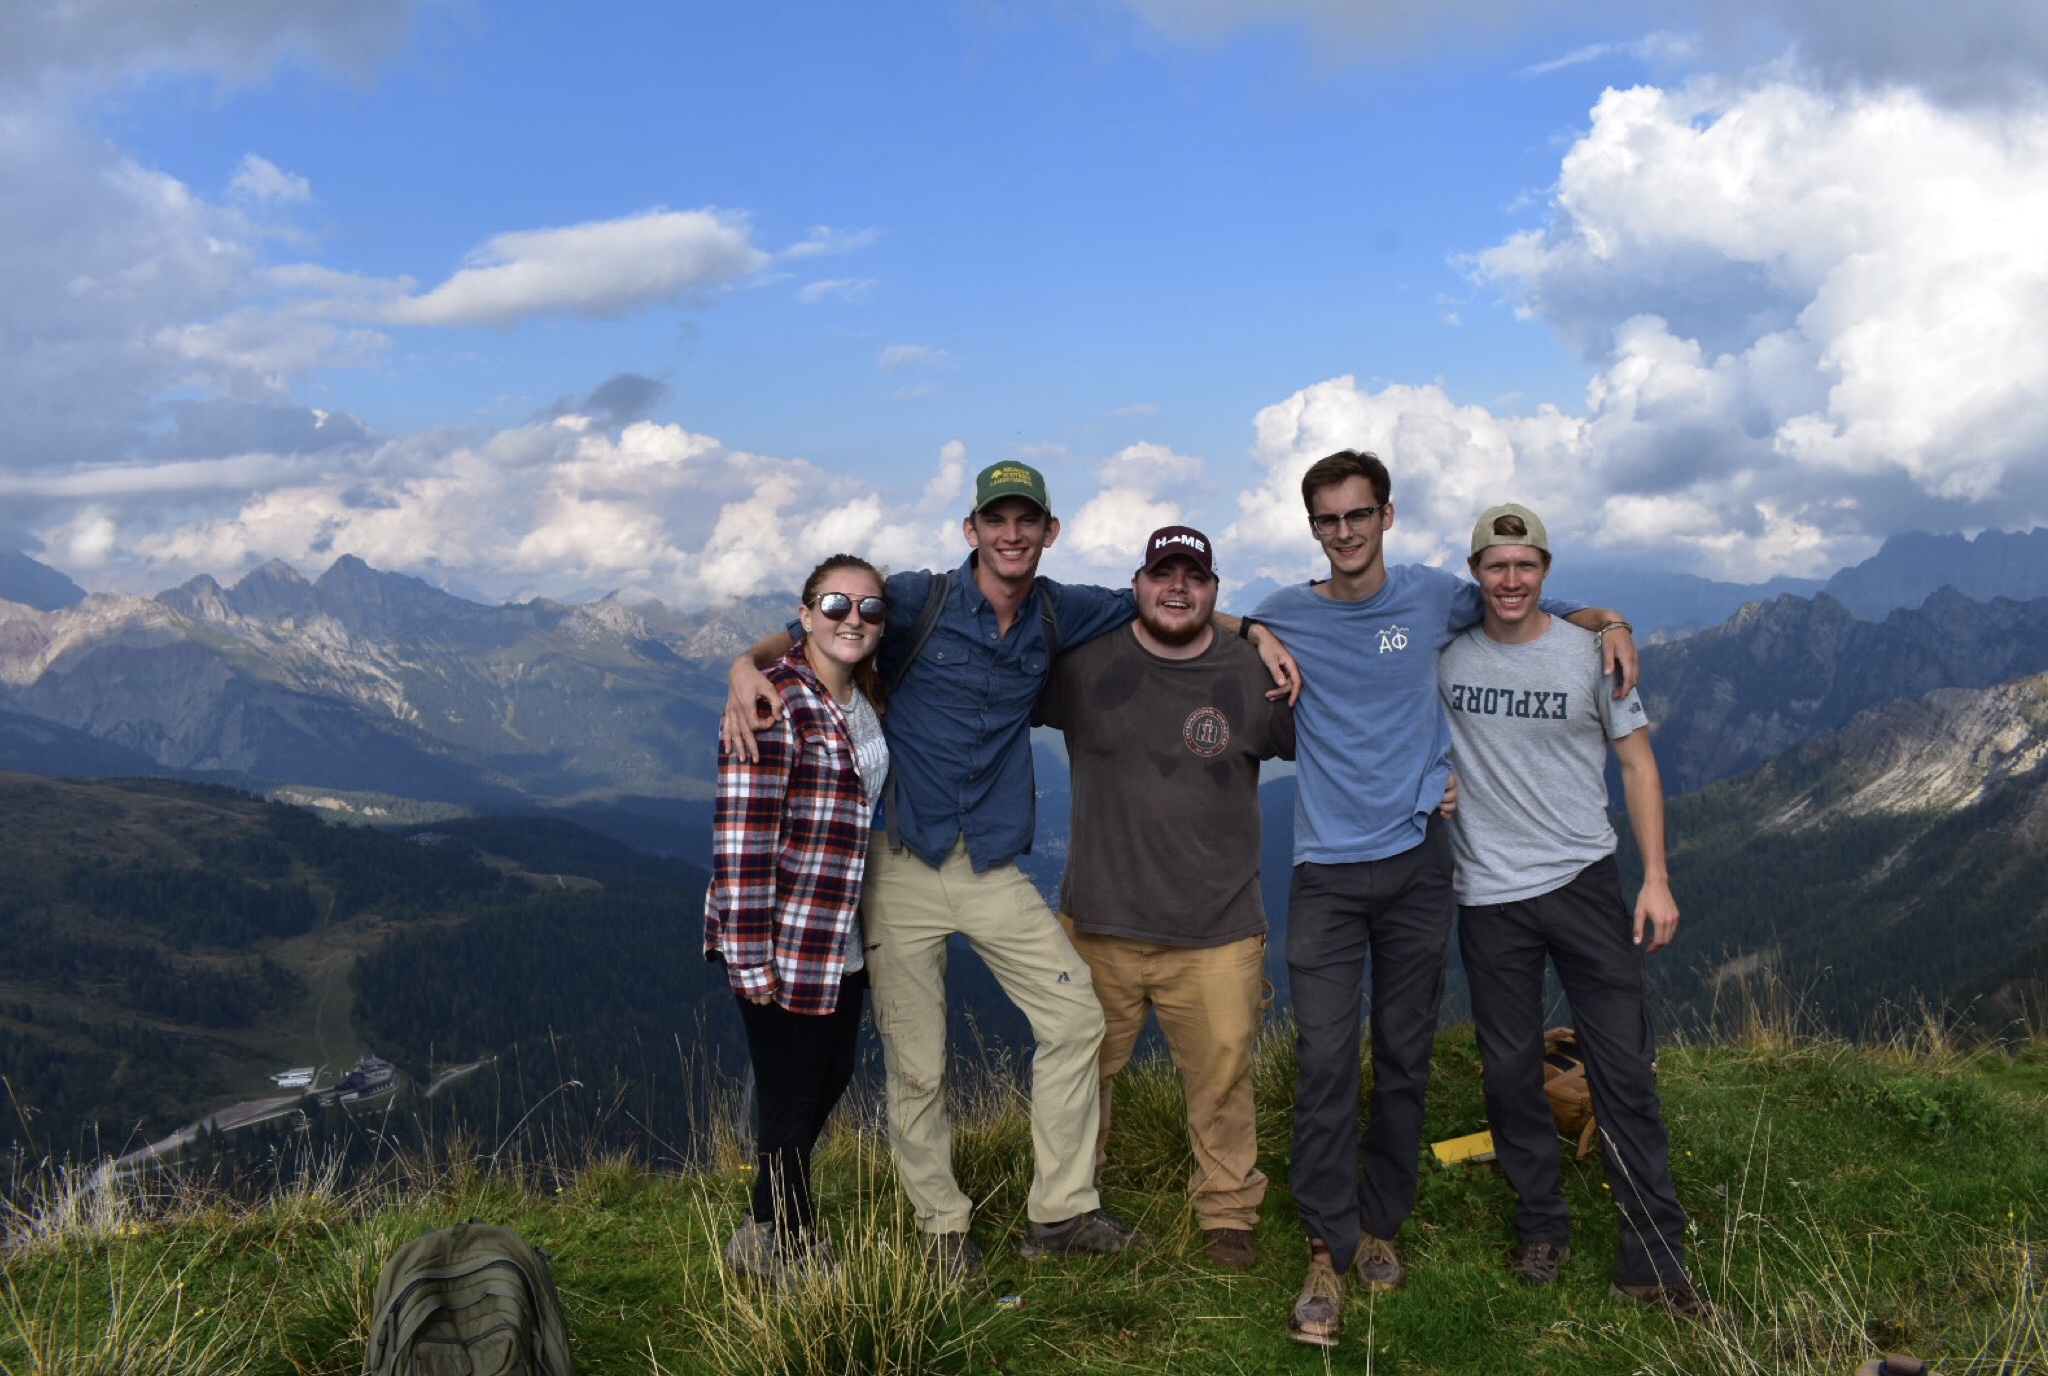 Shelly Worek spent a semester studying abroad in Switzerland.